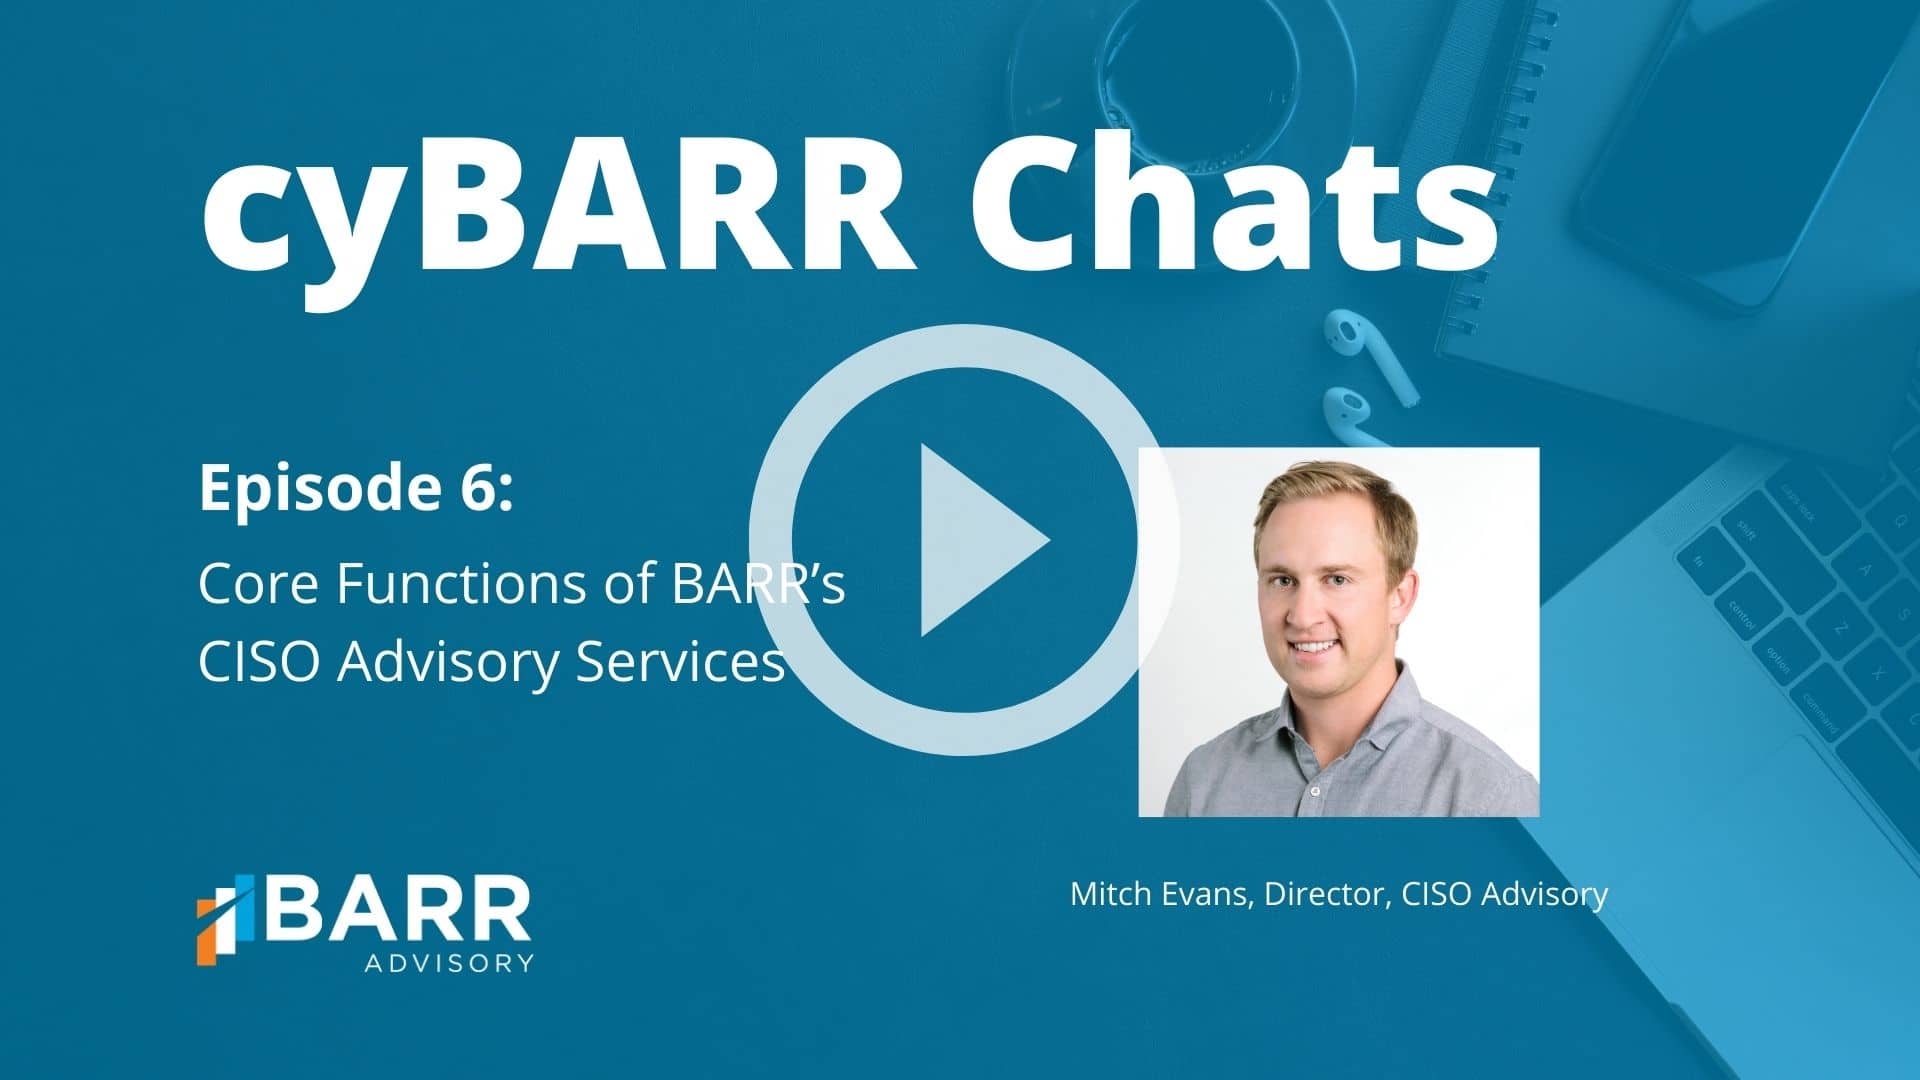 cyBARR Chats Episode 6: Core Functions of BARR’s CISO Advisory Practice